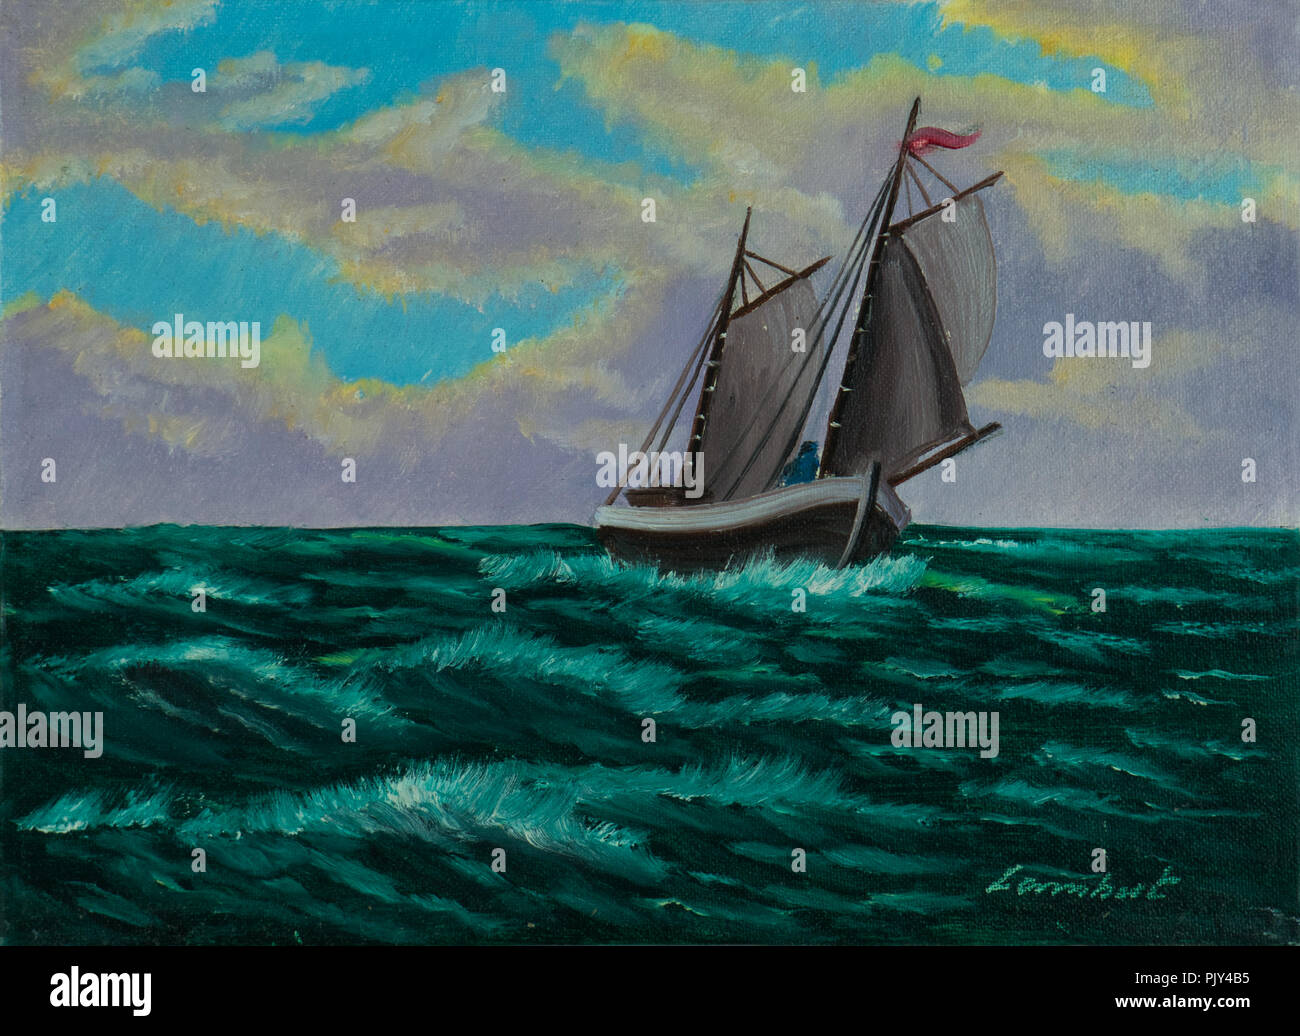 Oil painting - Sailing ship in blue-green water with light waves Stock Photo